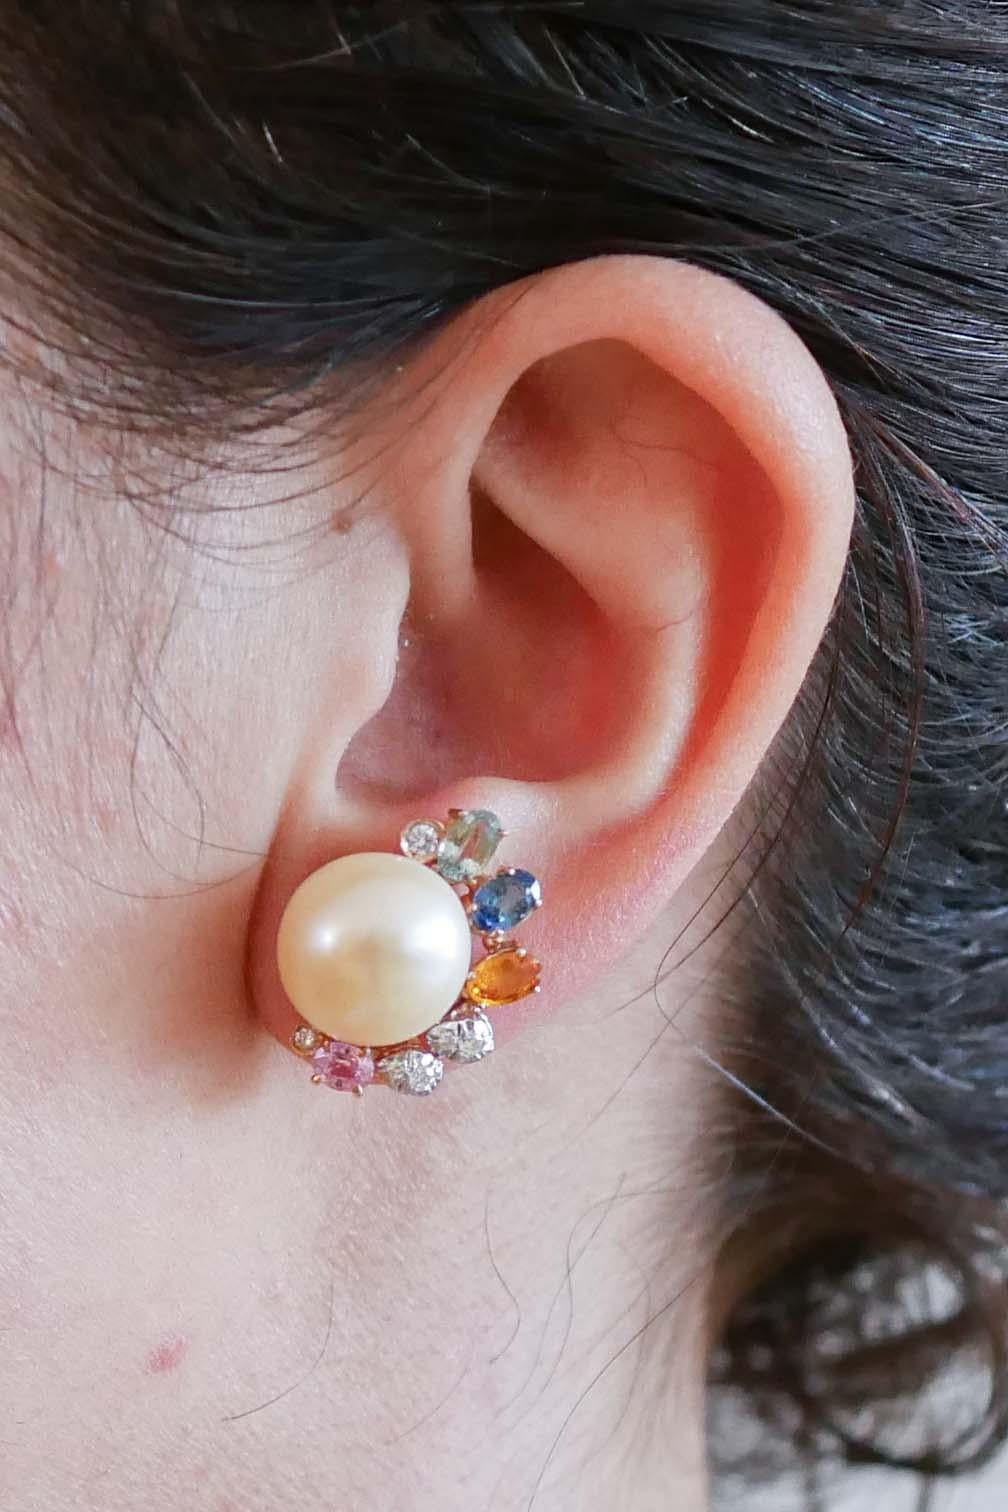 Mixed Cut Pearls, Multicolor Sapphires, Diamonds, 14 Karat Rose Gold Earrings. For Sale